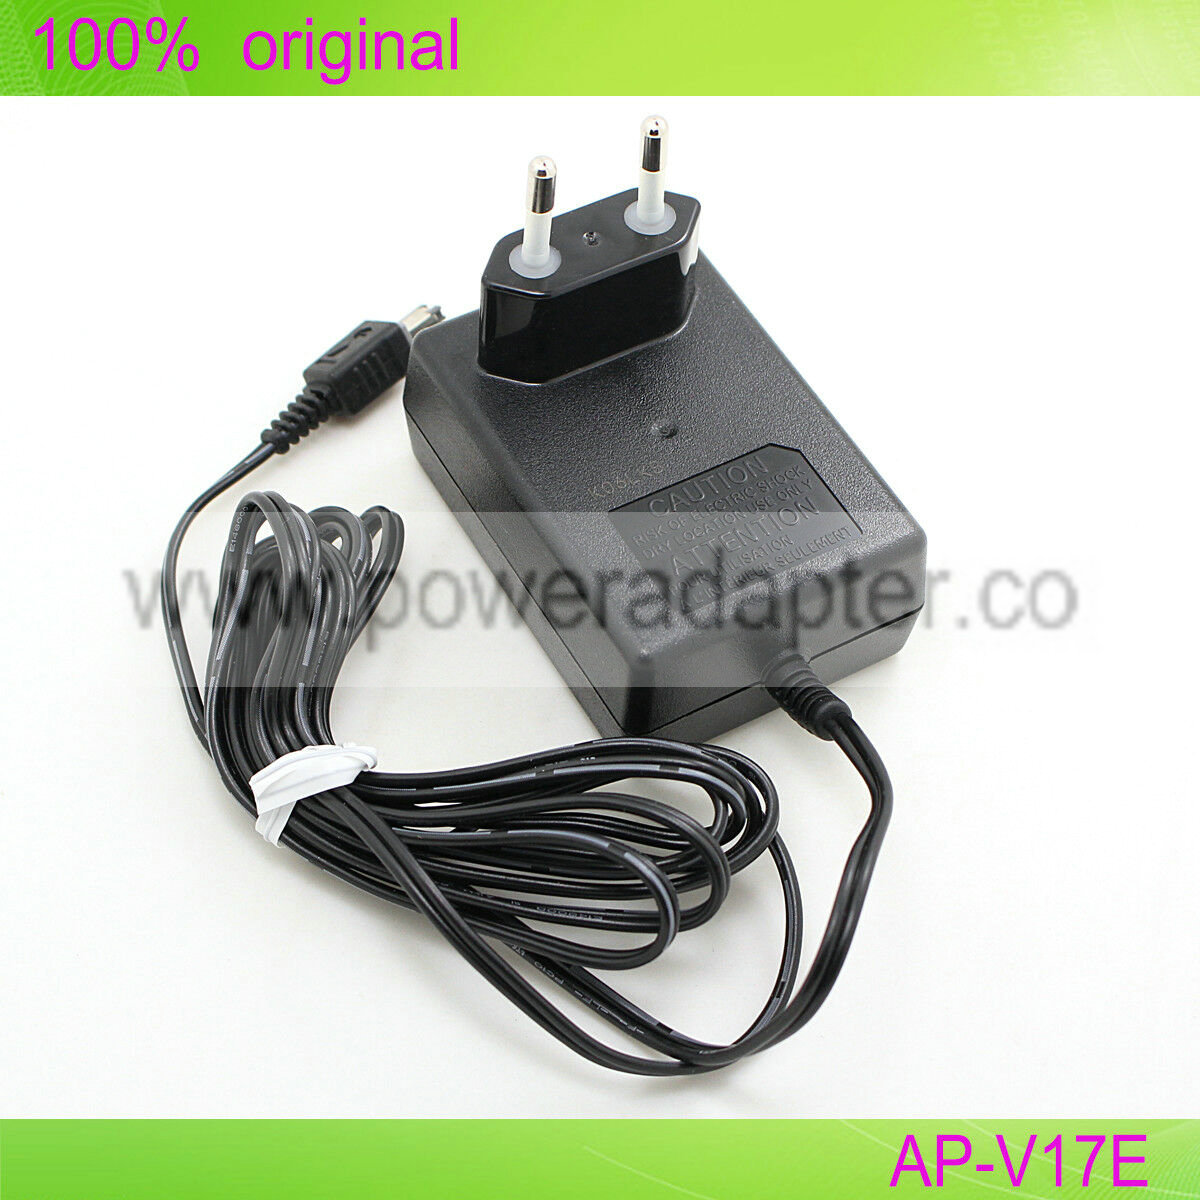 LY21103-001A Original JVC AP-V17E AP-V18E AP-V19E GR FX16 AC Power Adapter Charger 11V 1A